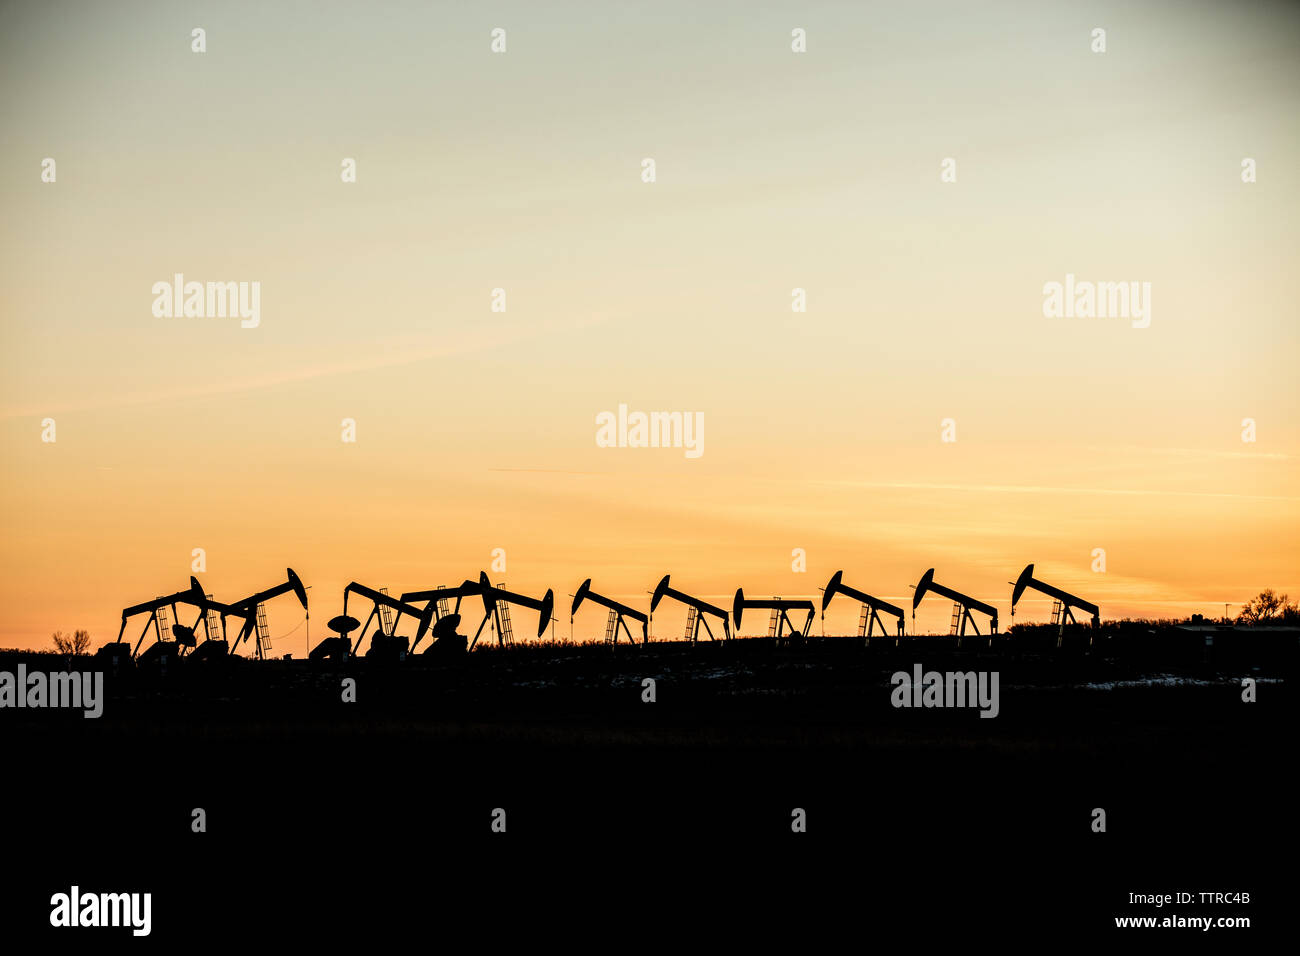 Mid distance view of silhouette pumpjacks at oil industry against sky during sunset Stock Photo